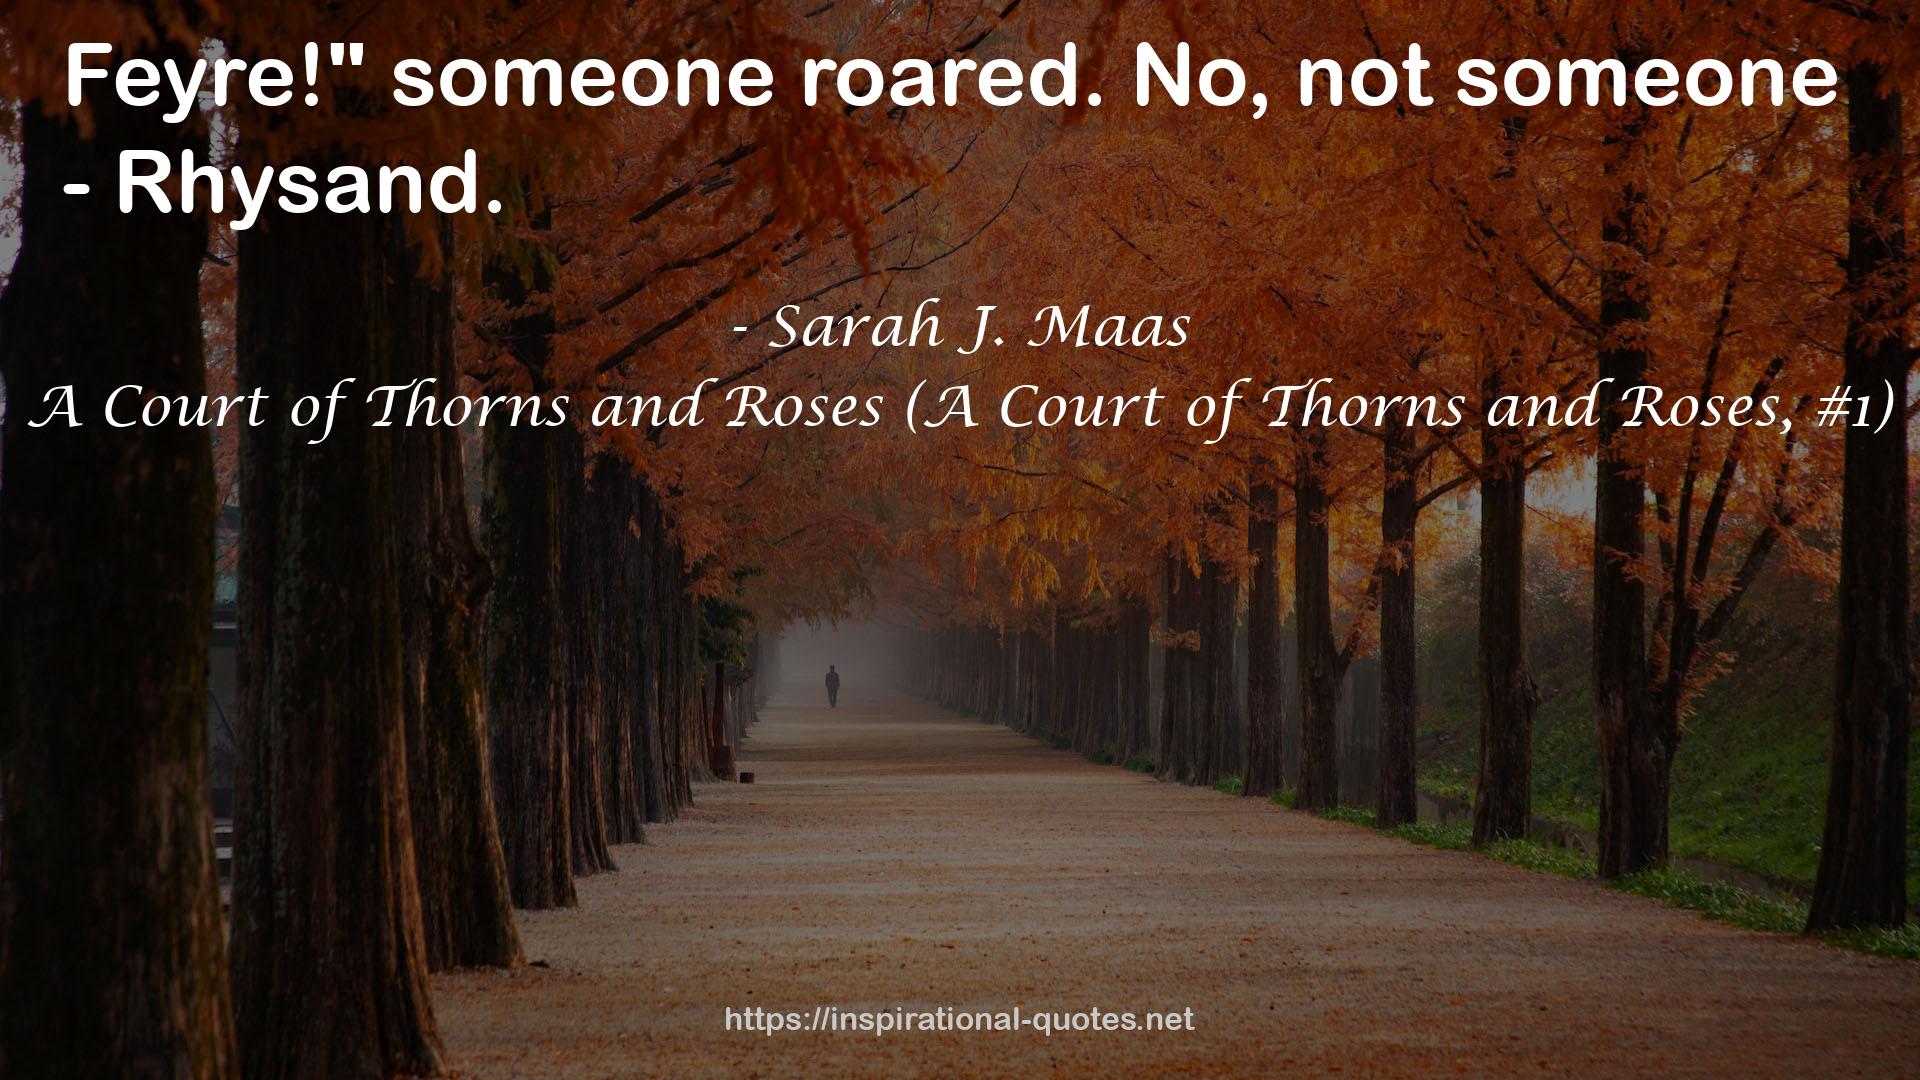 A Court of Thorns and Roses (A Court of Thorns and Roses, #1) QUOTES